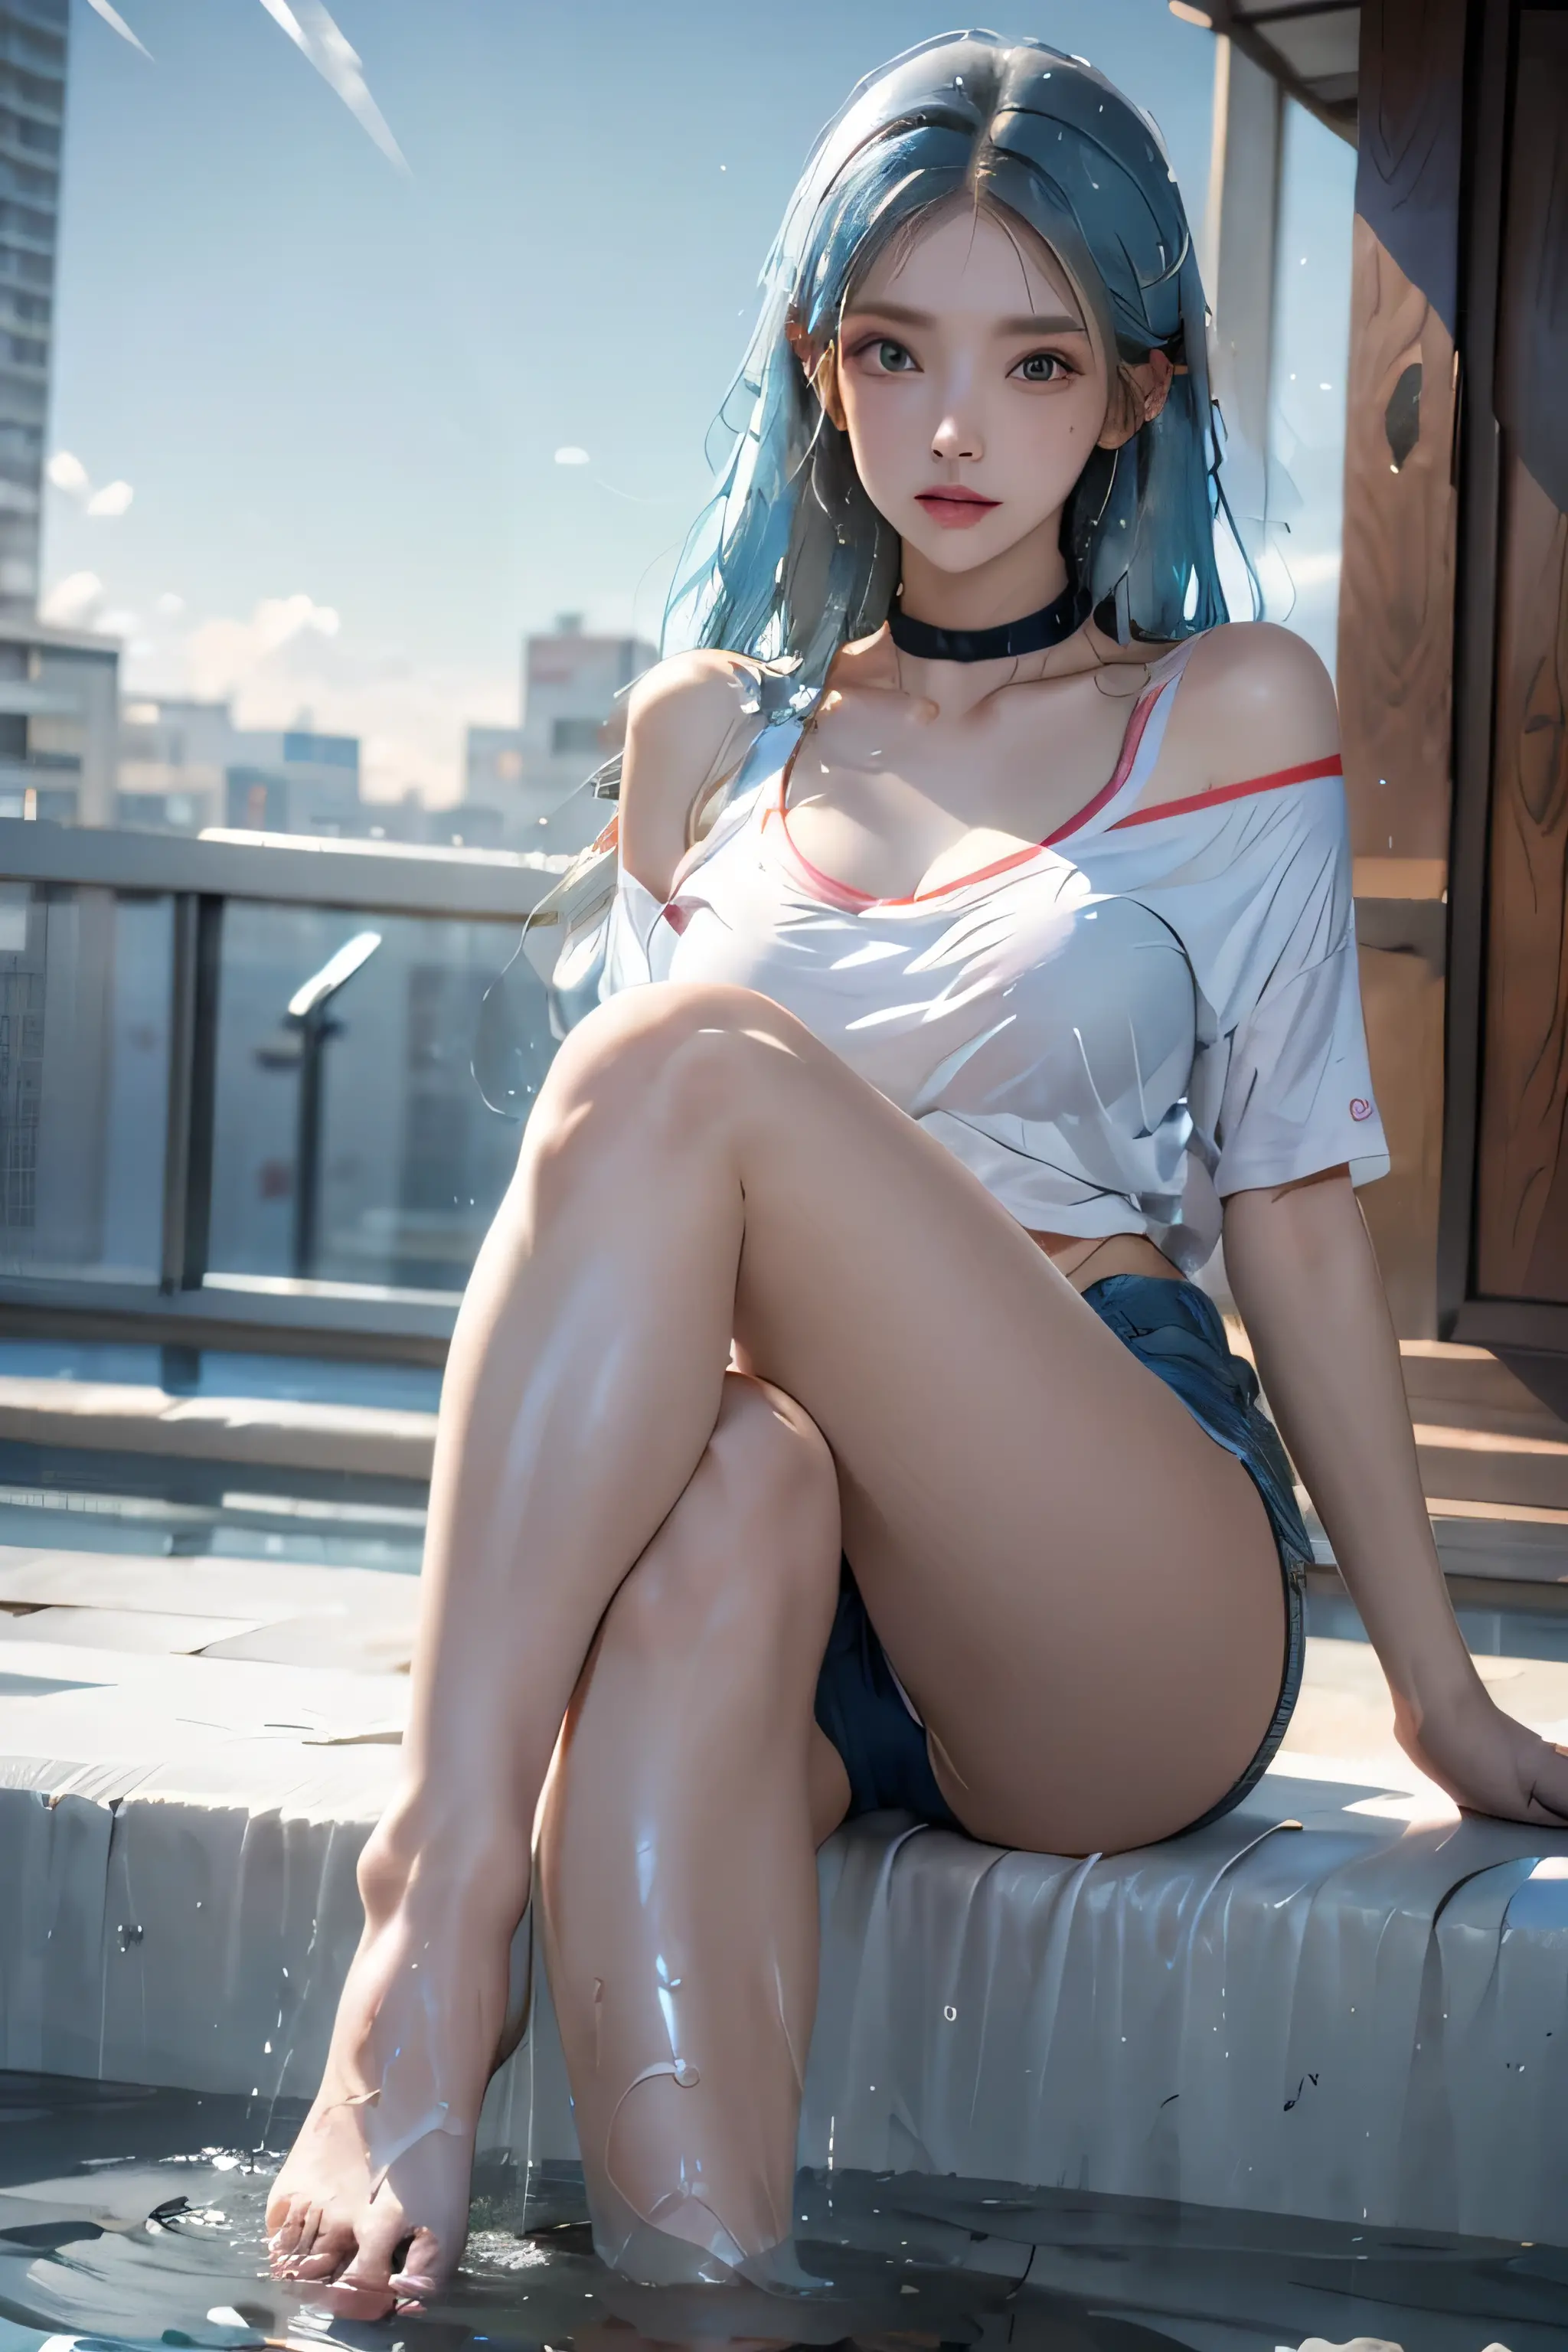 high quality,8K quality,High resolution,(masutepiece:1.3),23 year old woman, (white t-shirt,High leg wedgie panties,choker),(shoulder-length hair:1.2,wet light blue hair:1.3),(Bold pose with legs spread,dynamic pose:1.4),(Soak in a warm hot spring，vaporと静け...